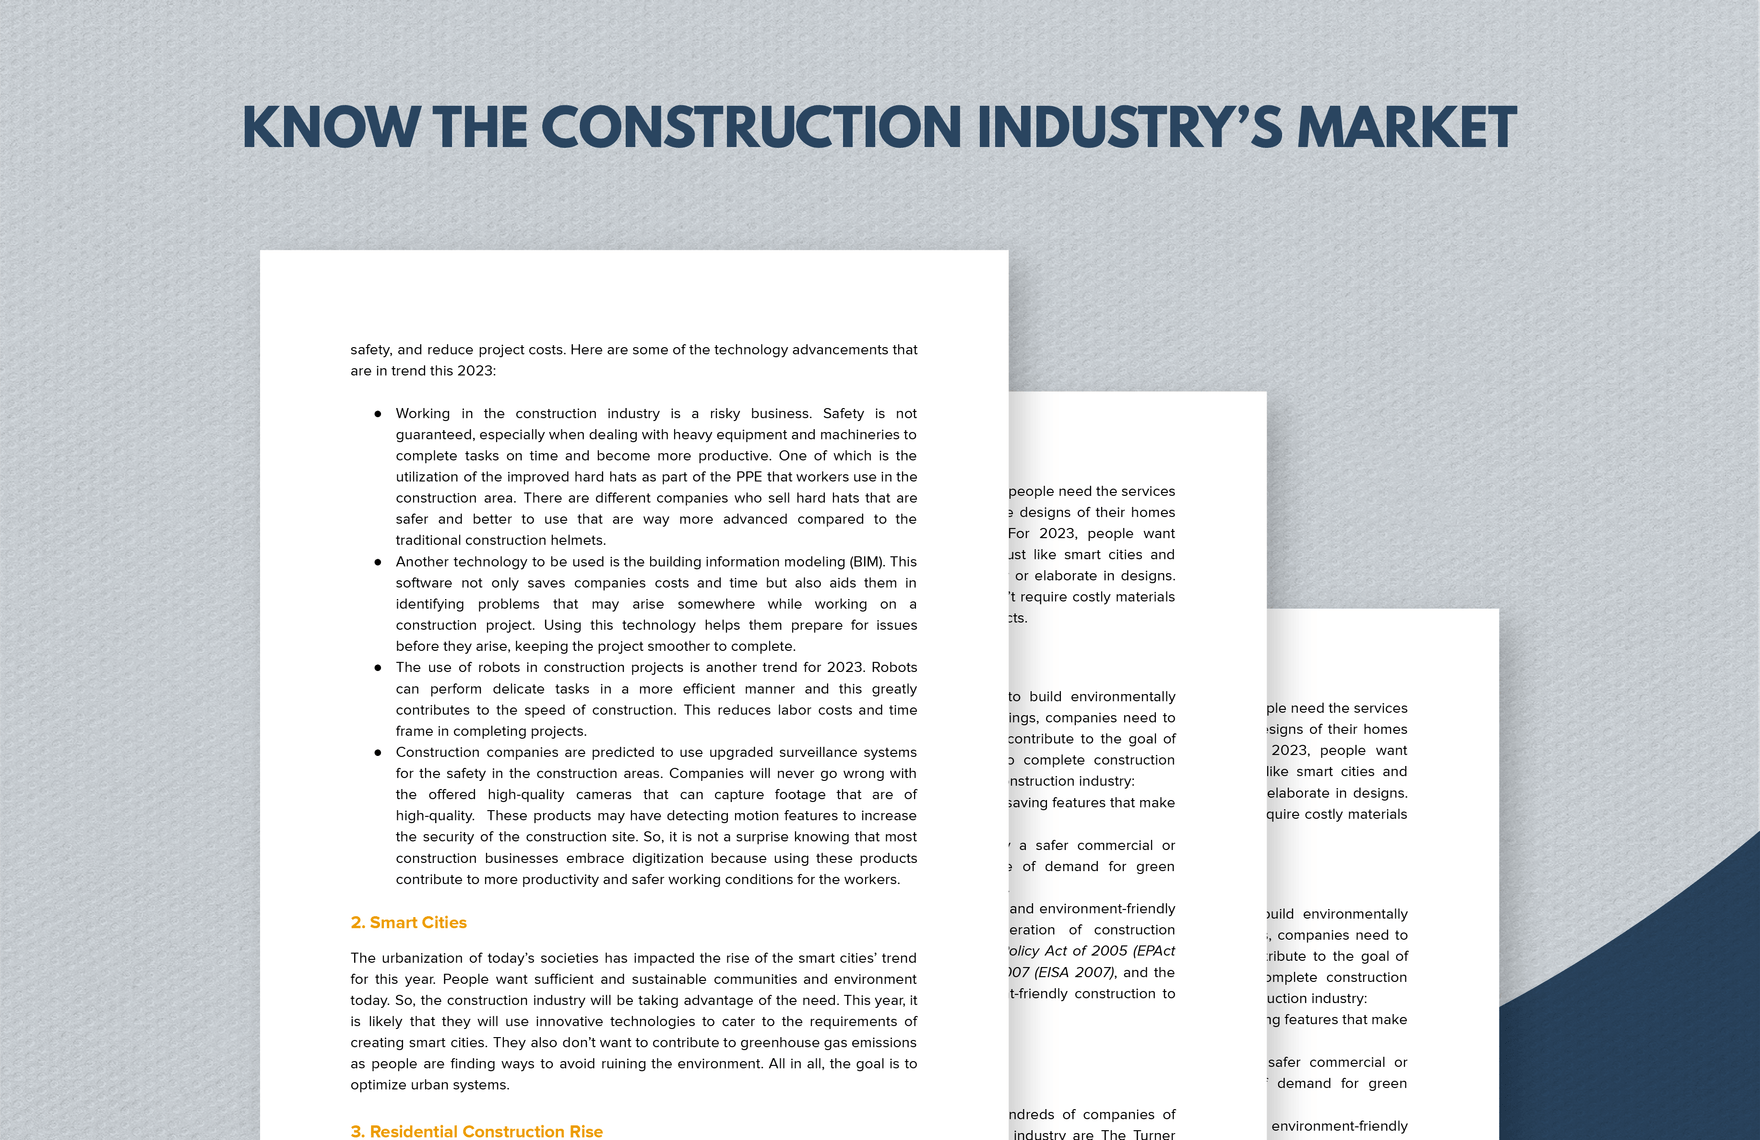 Construction Market Research 2023